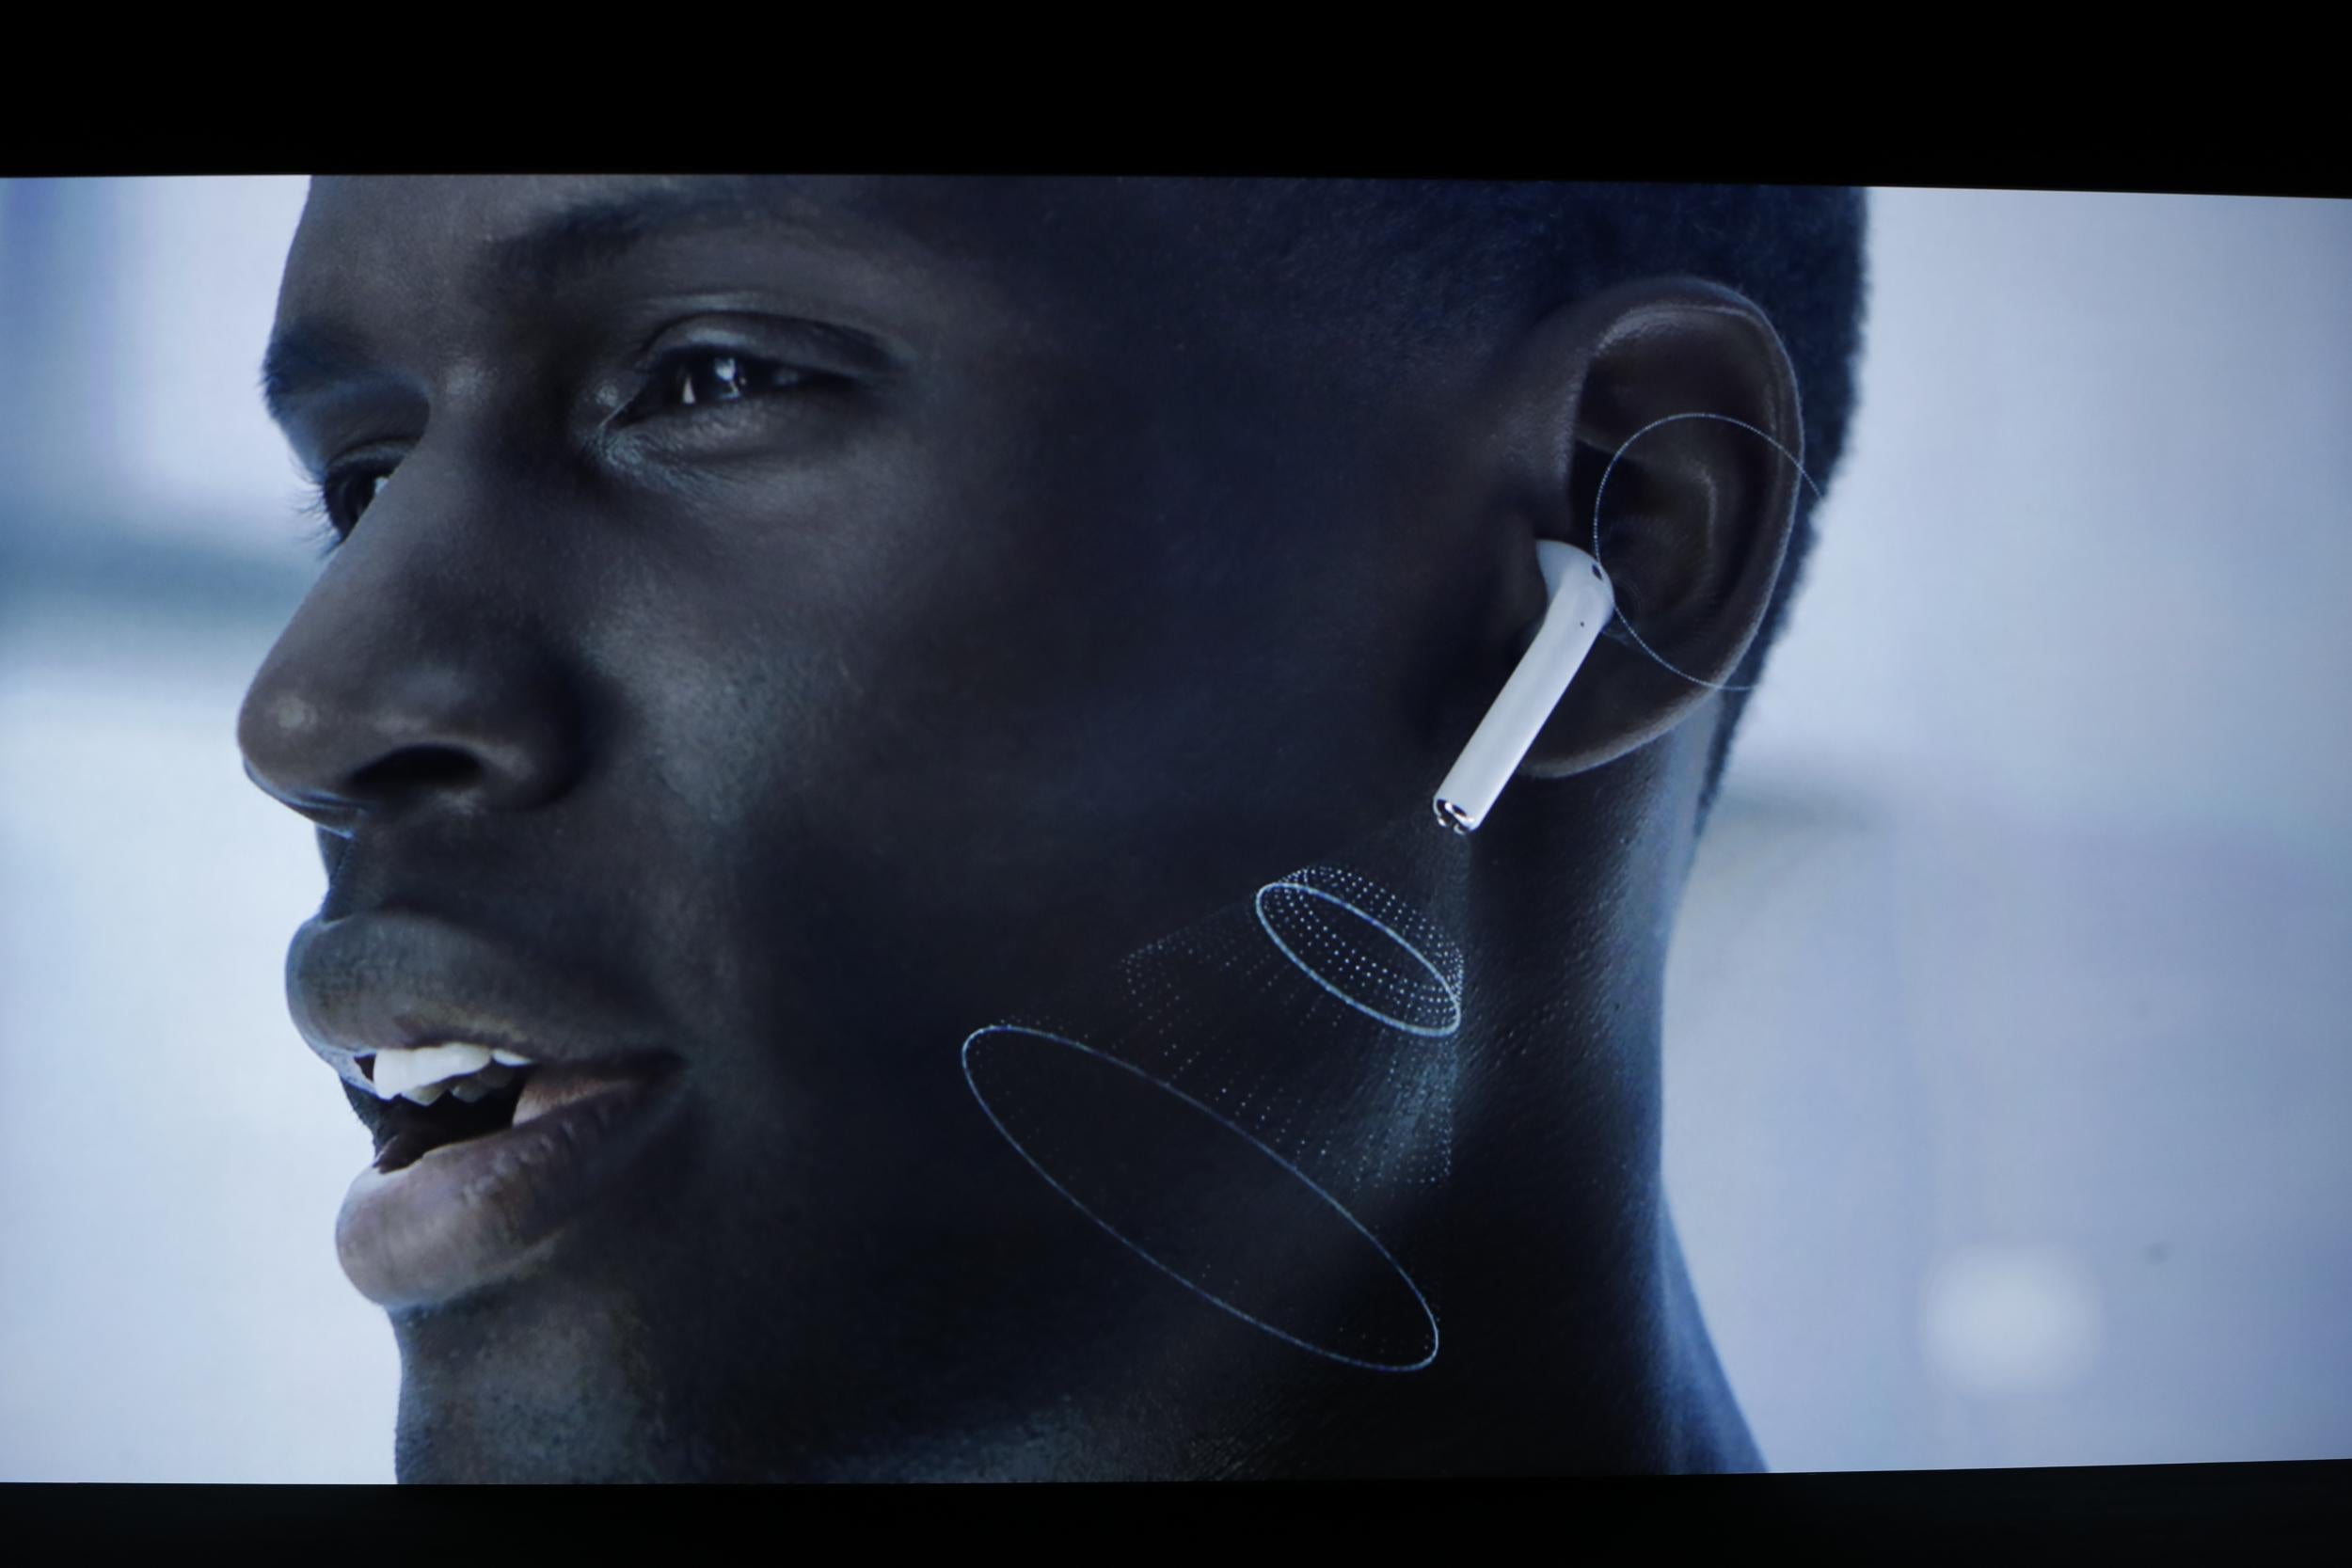 Apple AirPods launch event in San Francisco